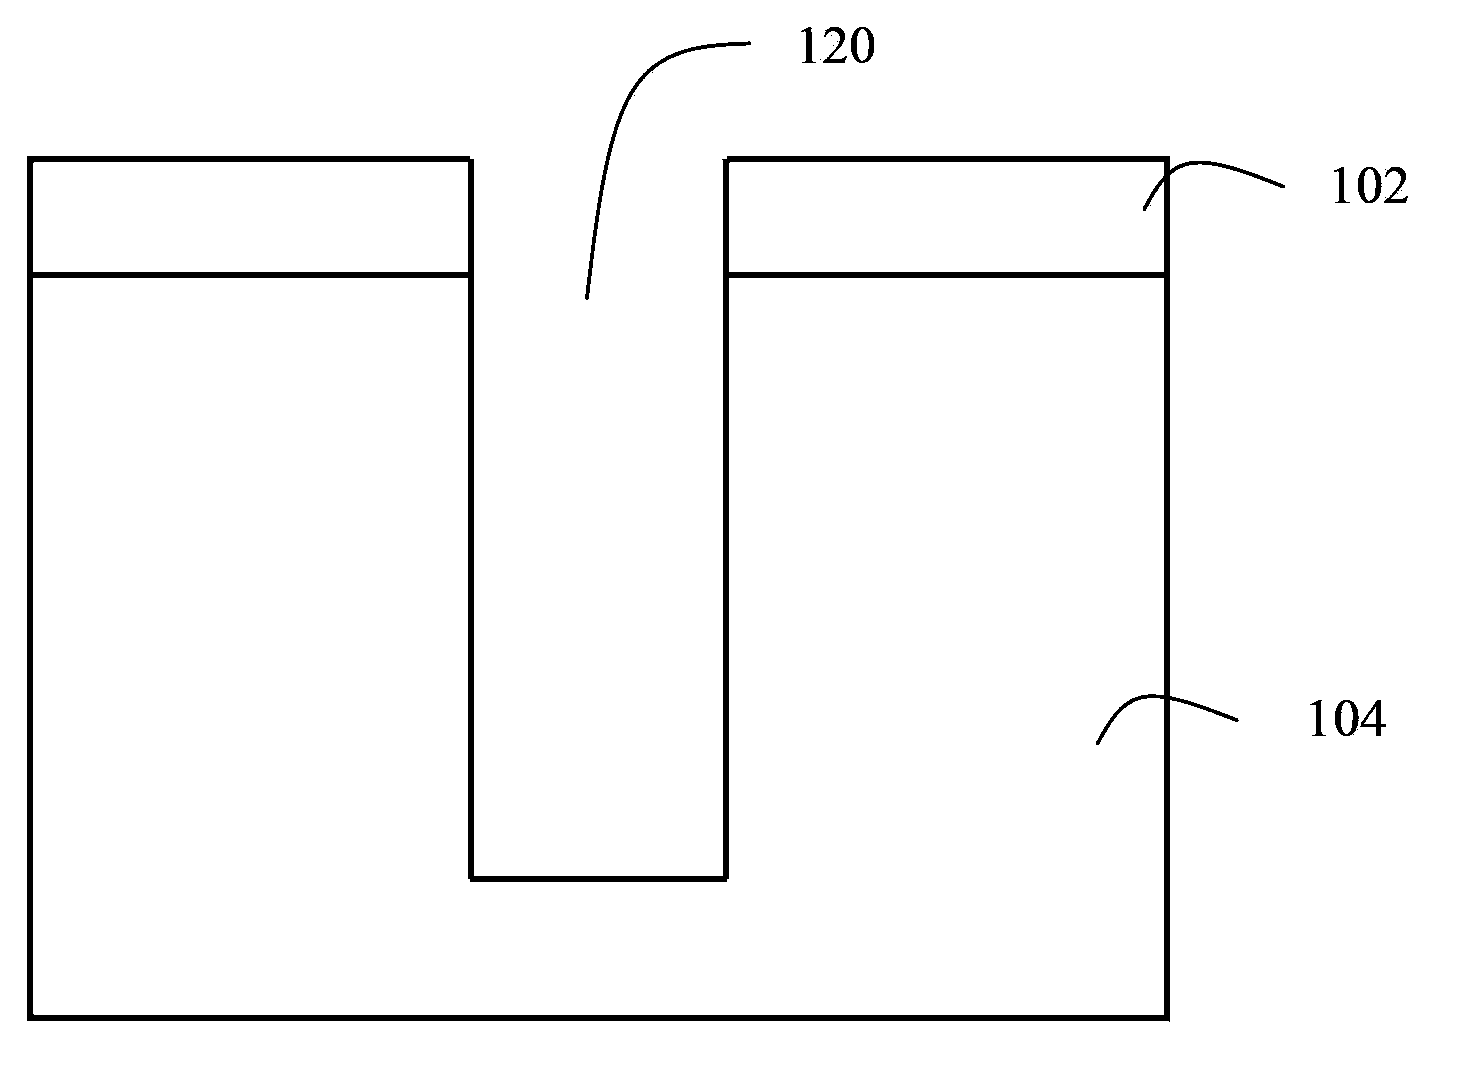 Method for improving the shape of side wall of through hole